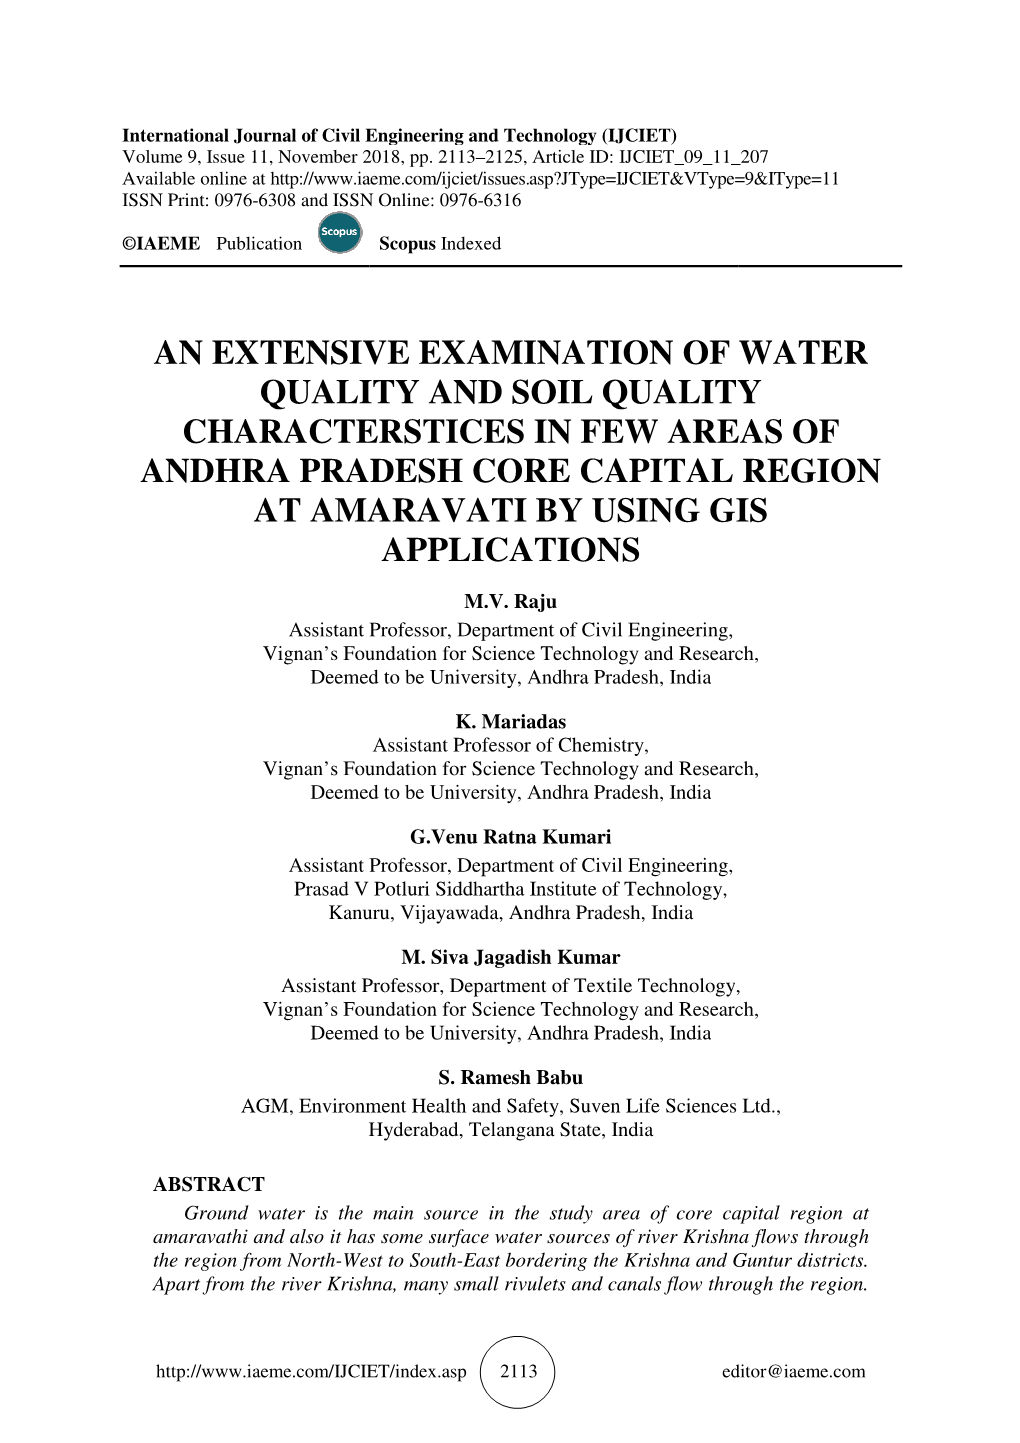 2018 Dec an Extensive Examination of Water Quality and Soil